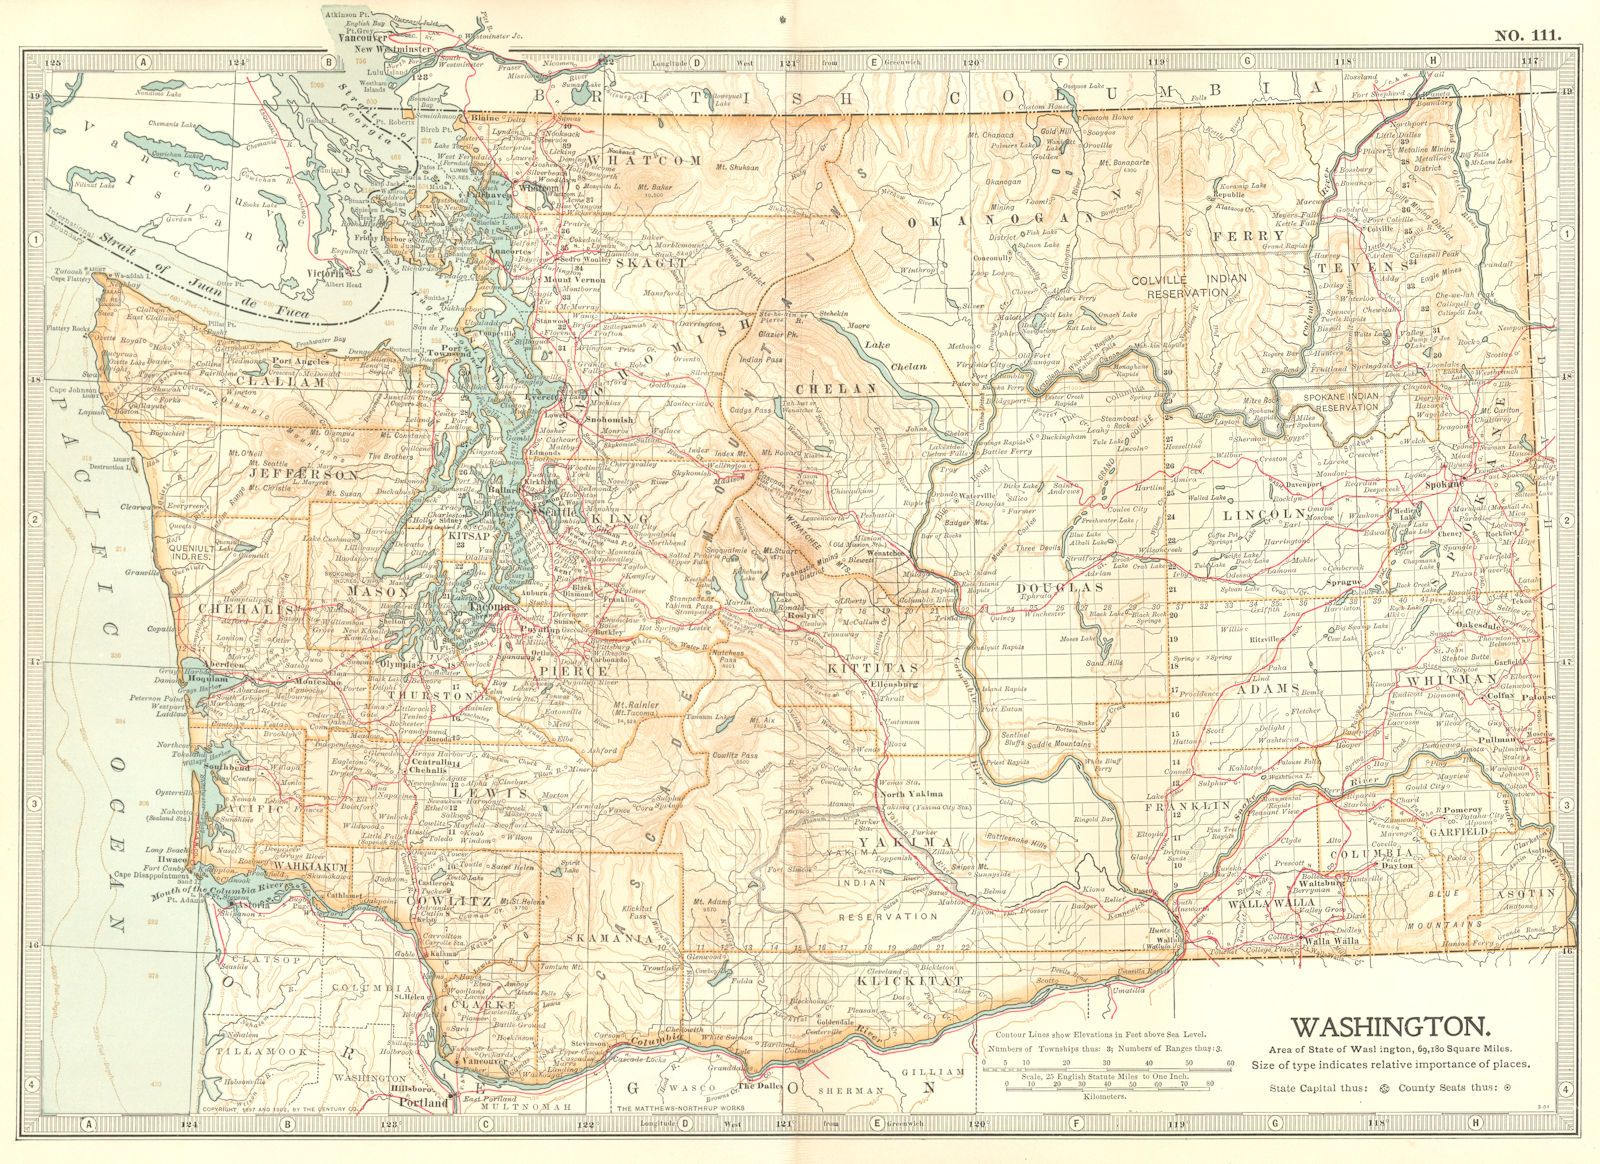 WASHINGTON STATE. Showing counties & Indian reservations. Britannica 1903 map